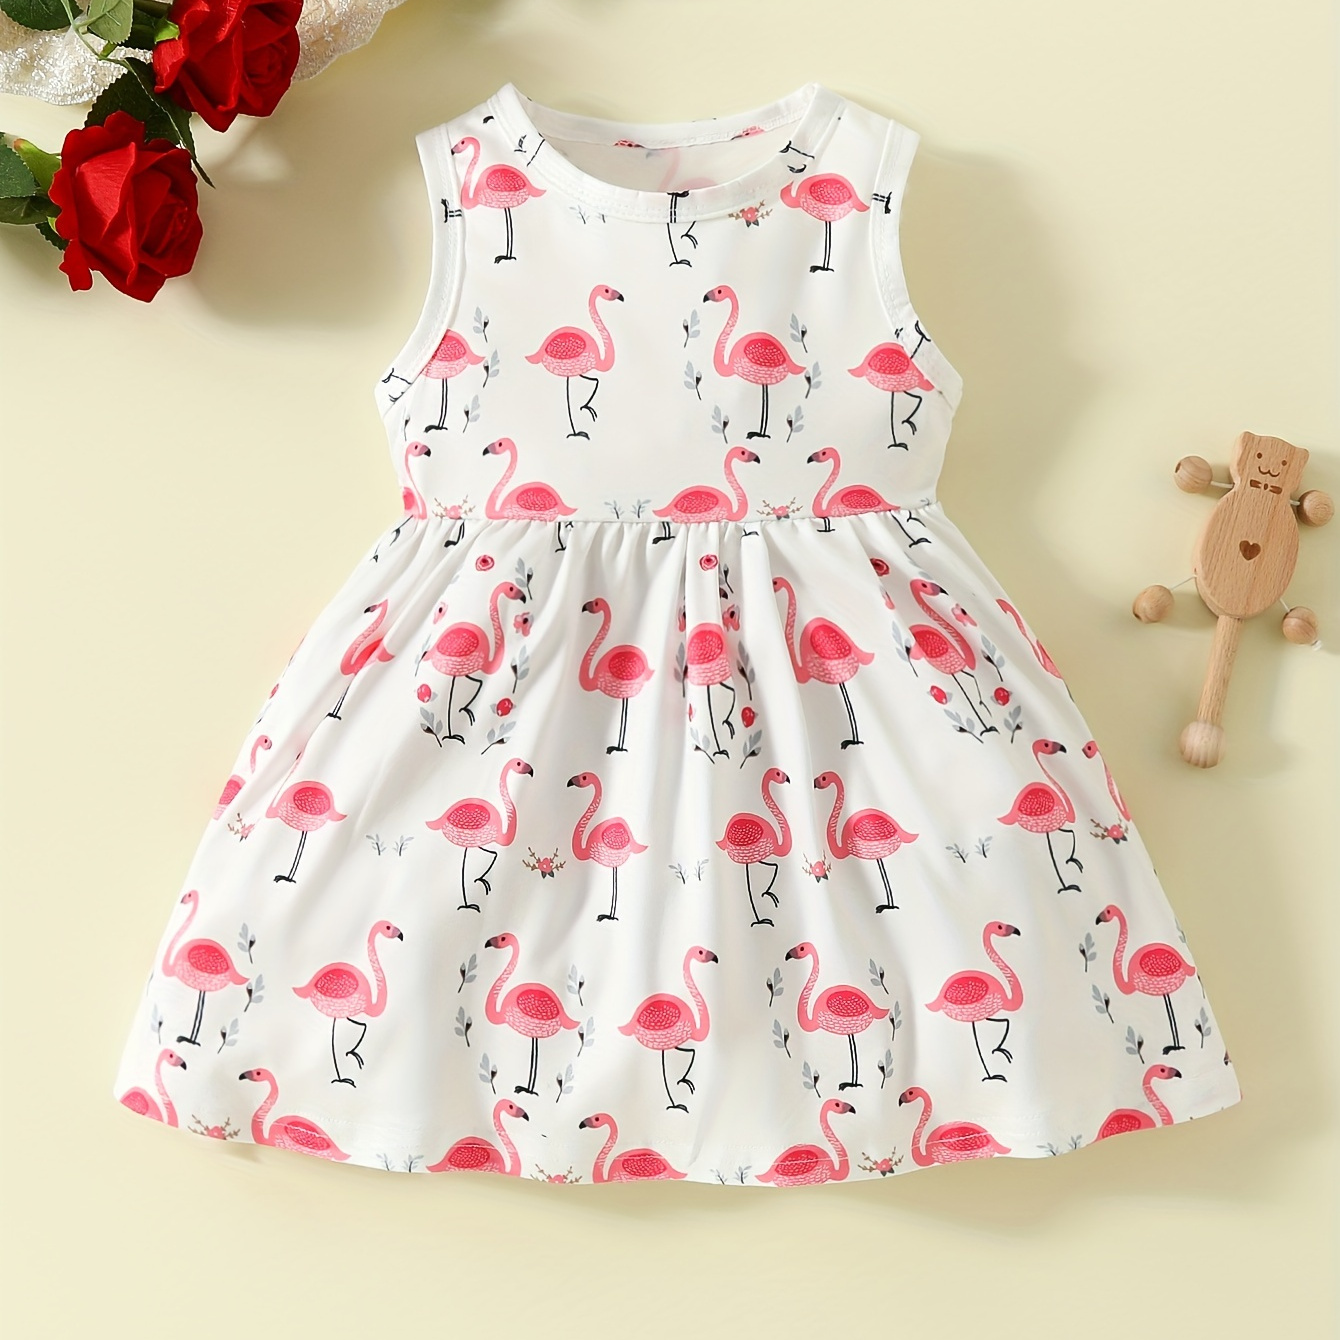 

Baby Cute Flamingo Print Sleeveless Dress, Comfortable Casual Clothes For Kids